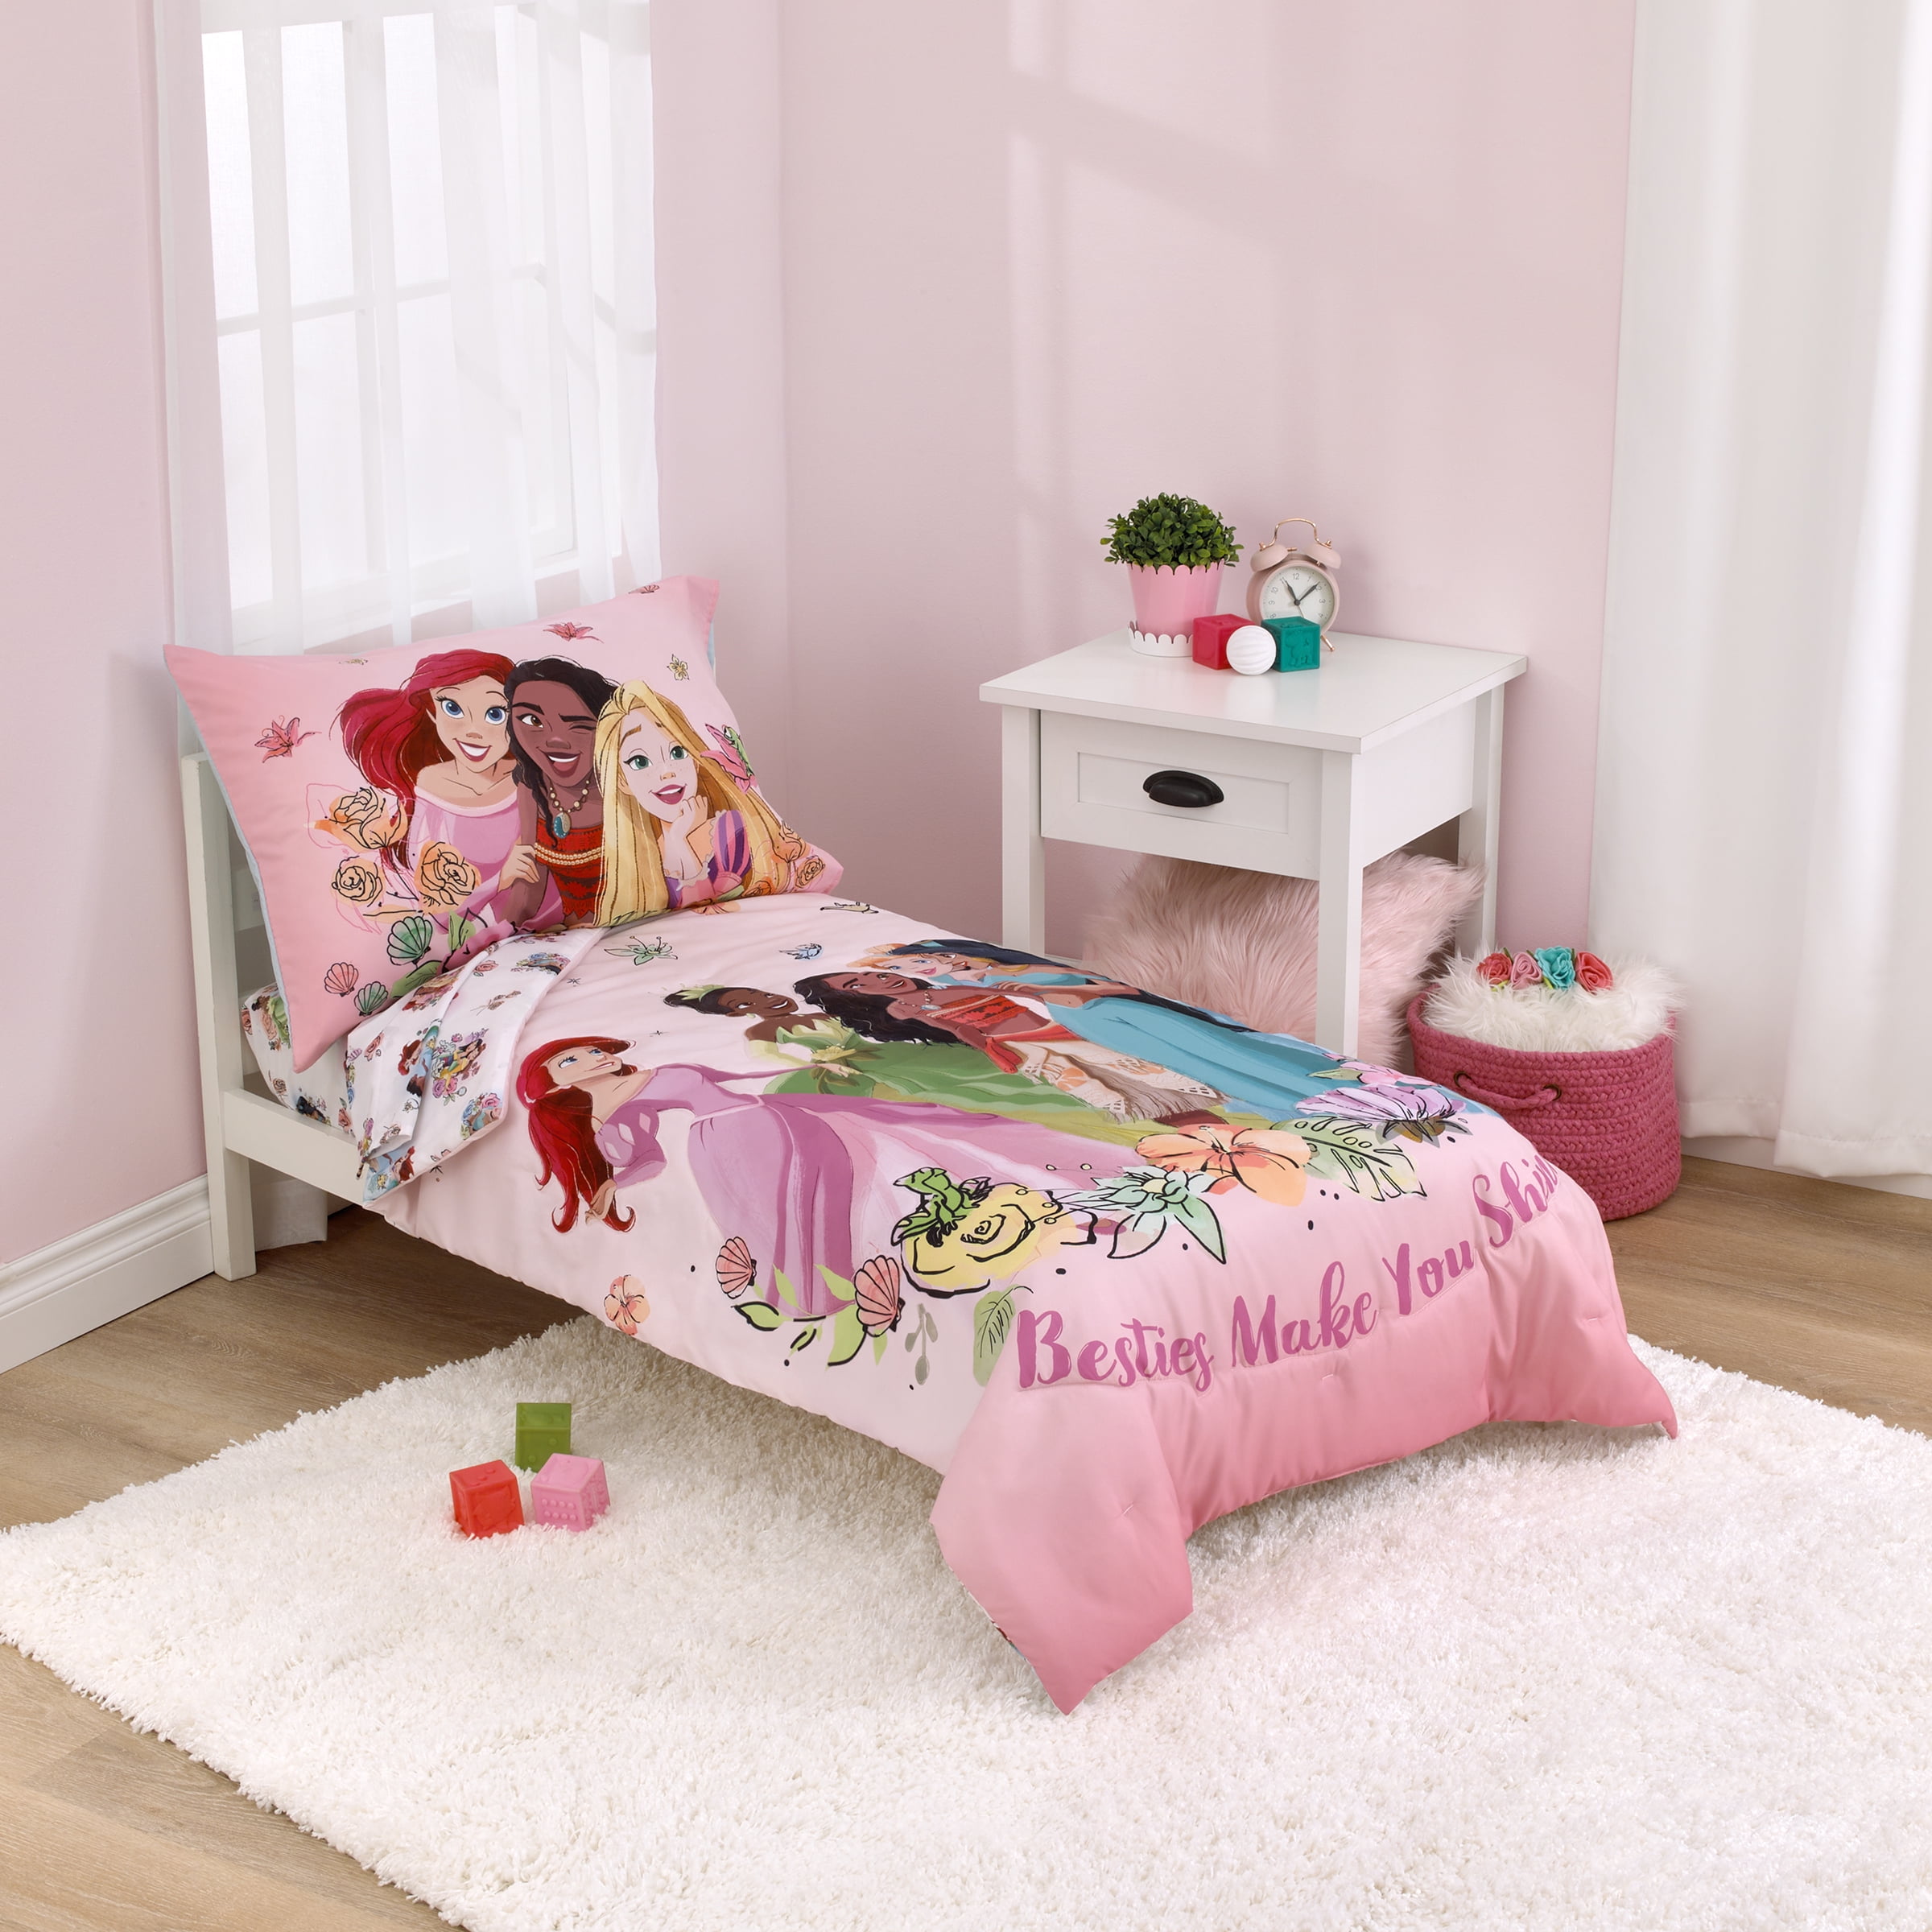 Disney Furniture: Bedroom Collections, Beds & Decor